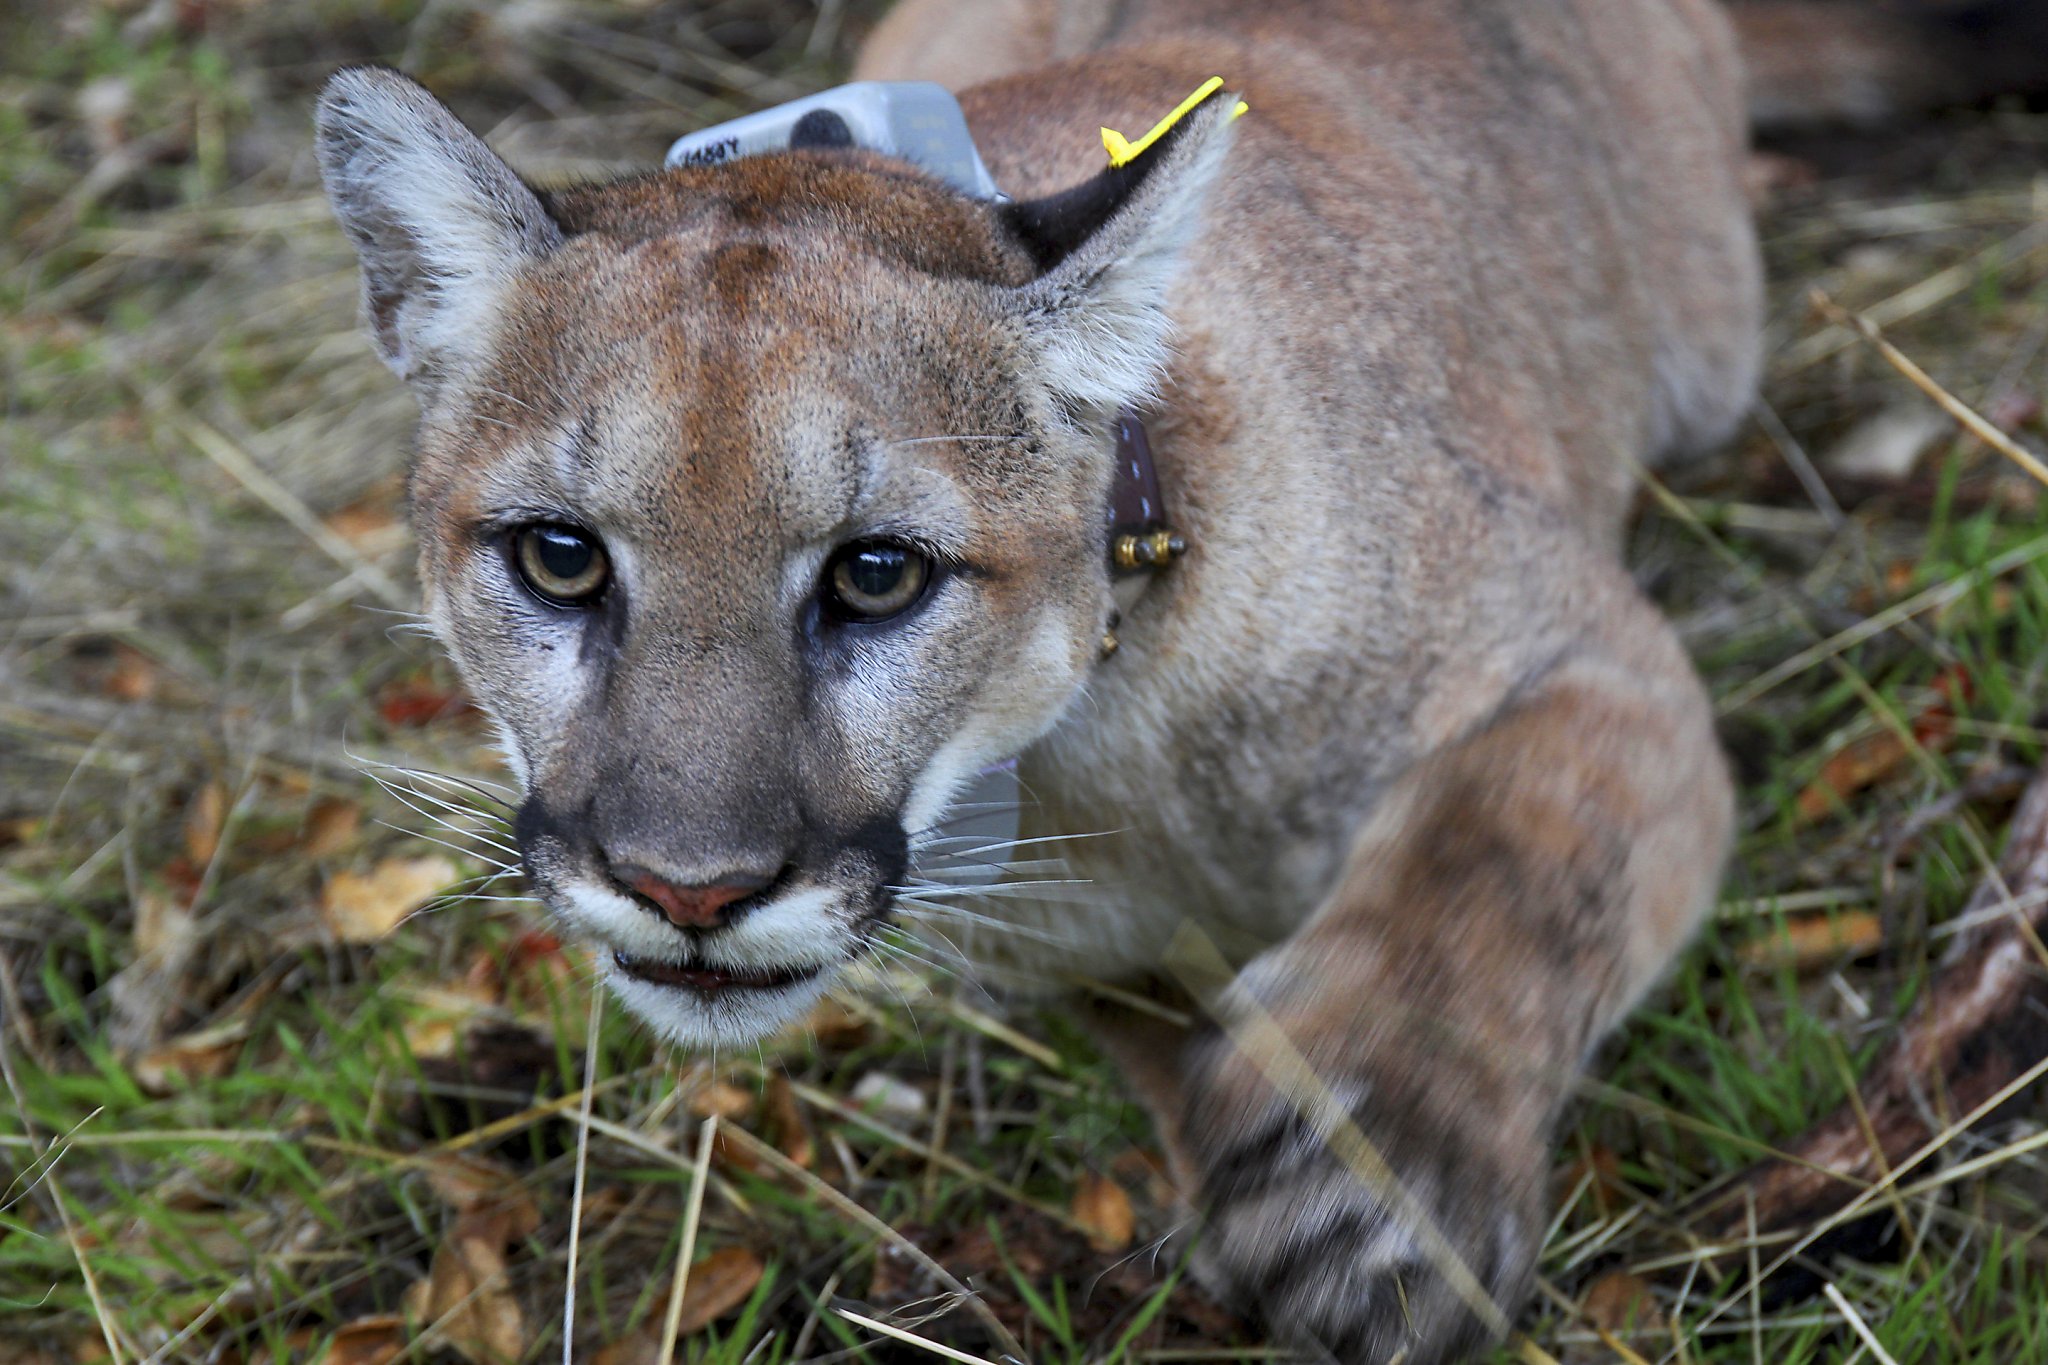 After mountain lion attack, authorities flooded with calls